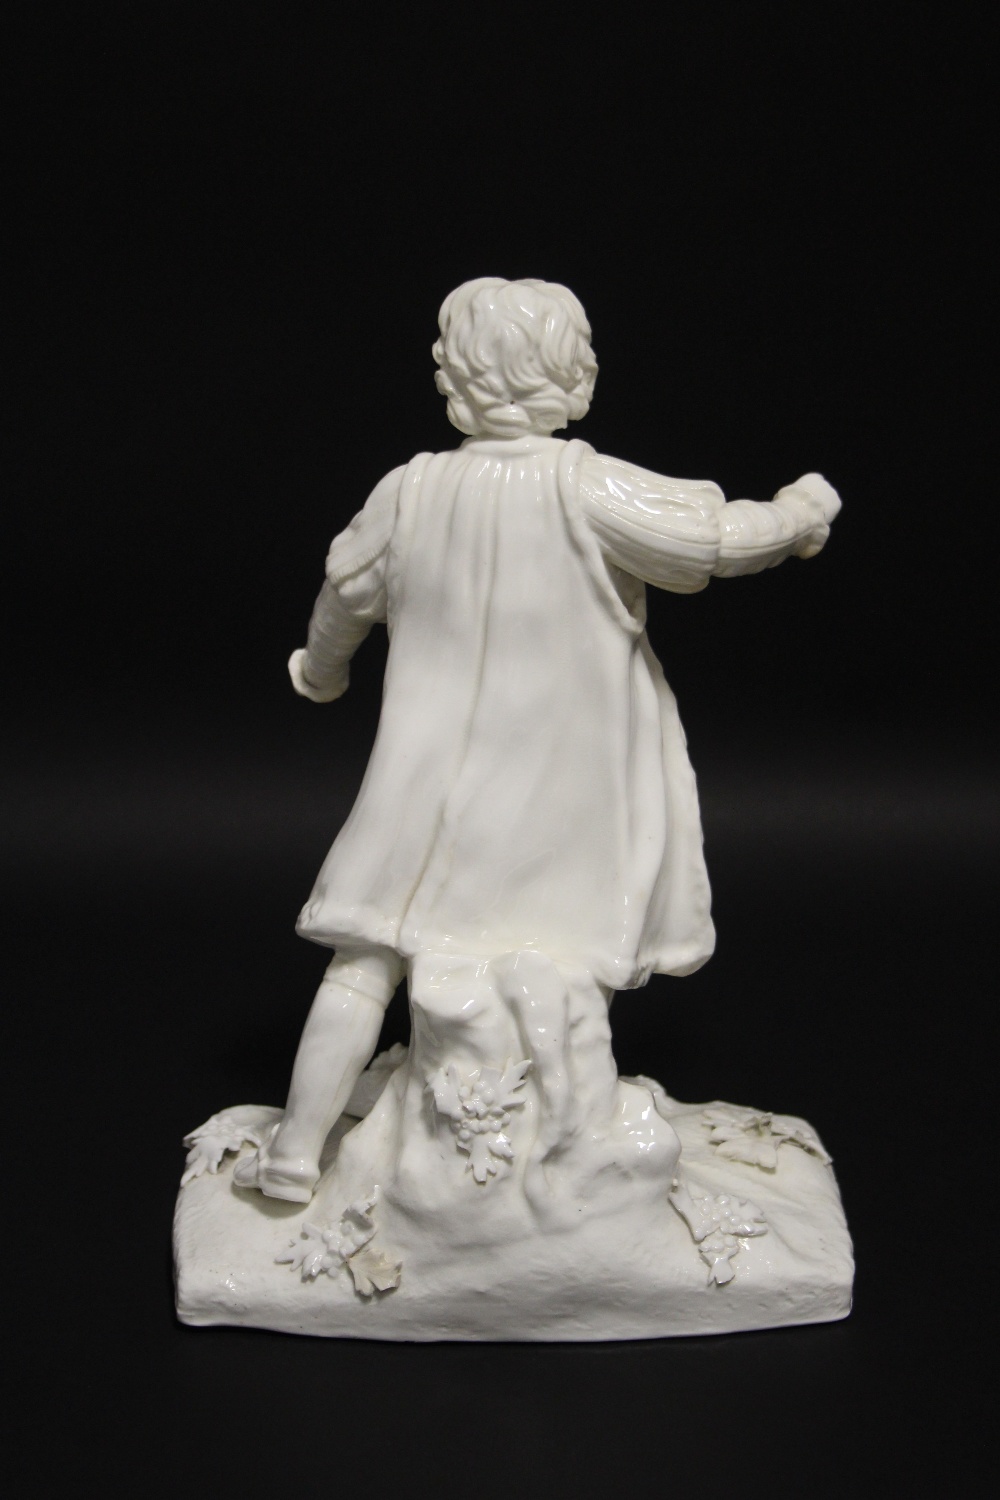 A Victorian white glazed Staffordshire porcelain standing figure of Garrick as Richard III, on - Image 4 of 6